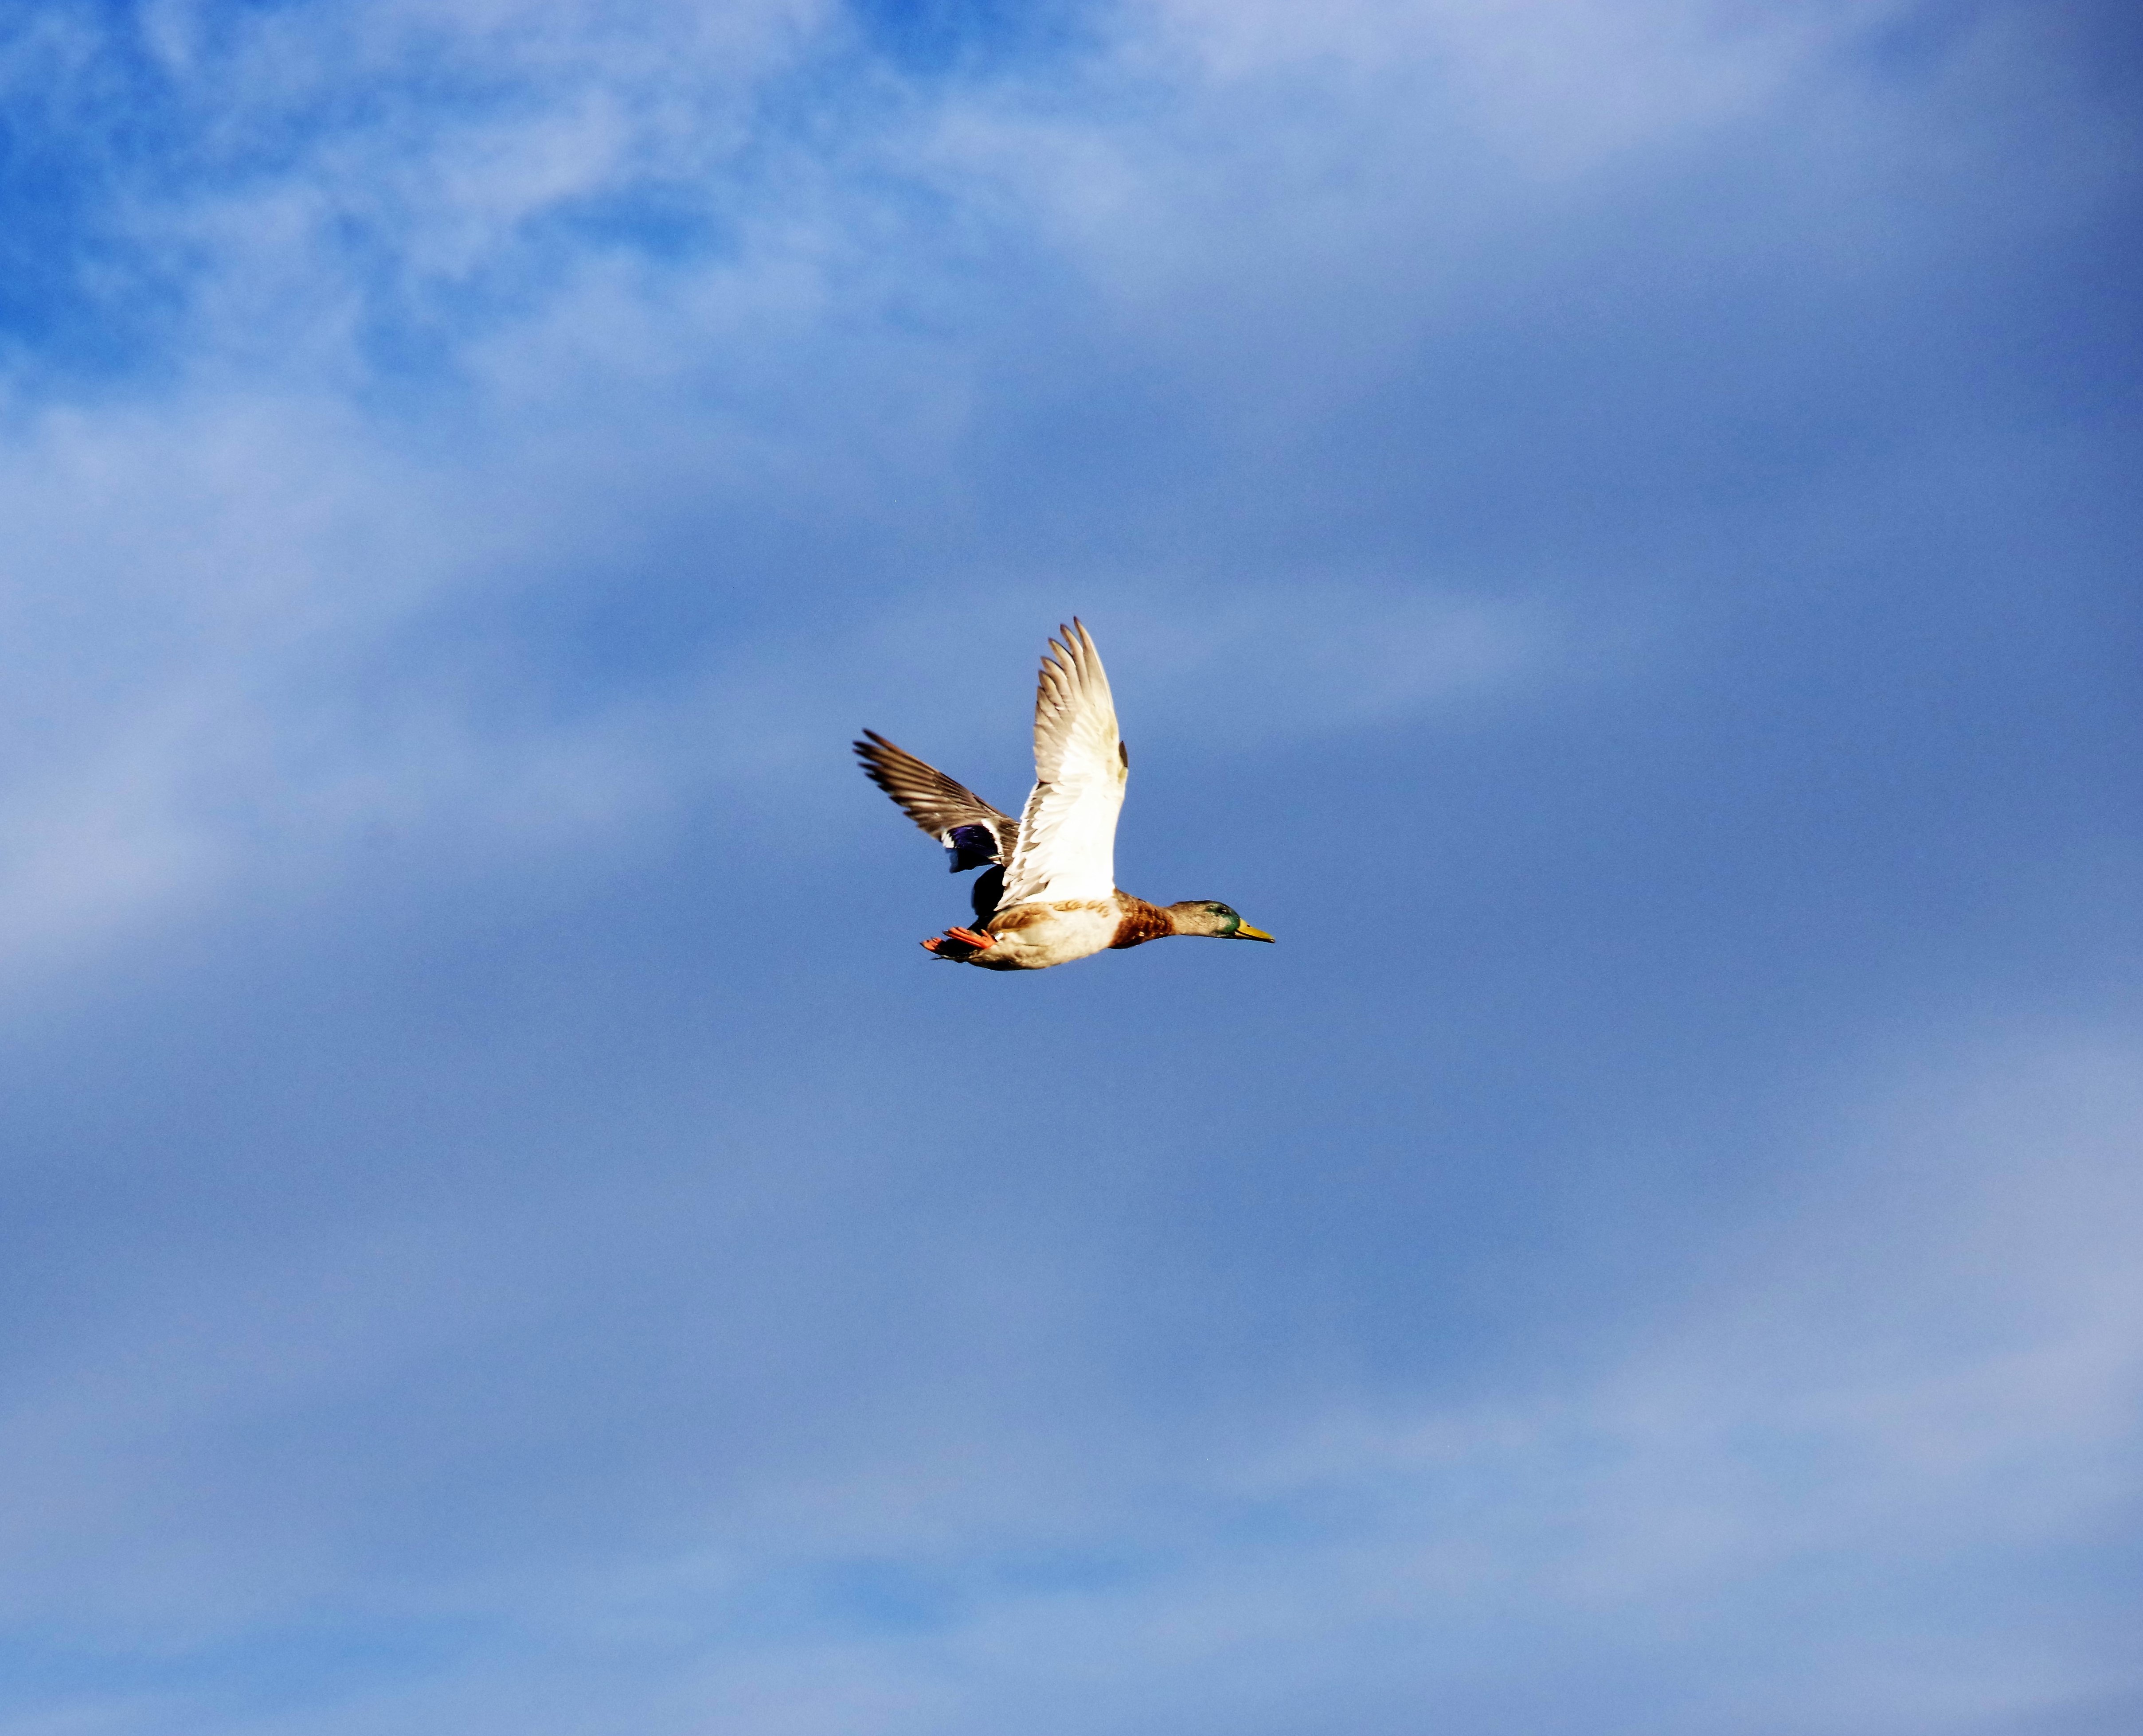 A Mallard drake in flight after release form the duck banding process and J. Clark Salyer National Wildlife Refuge